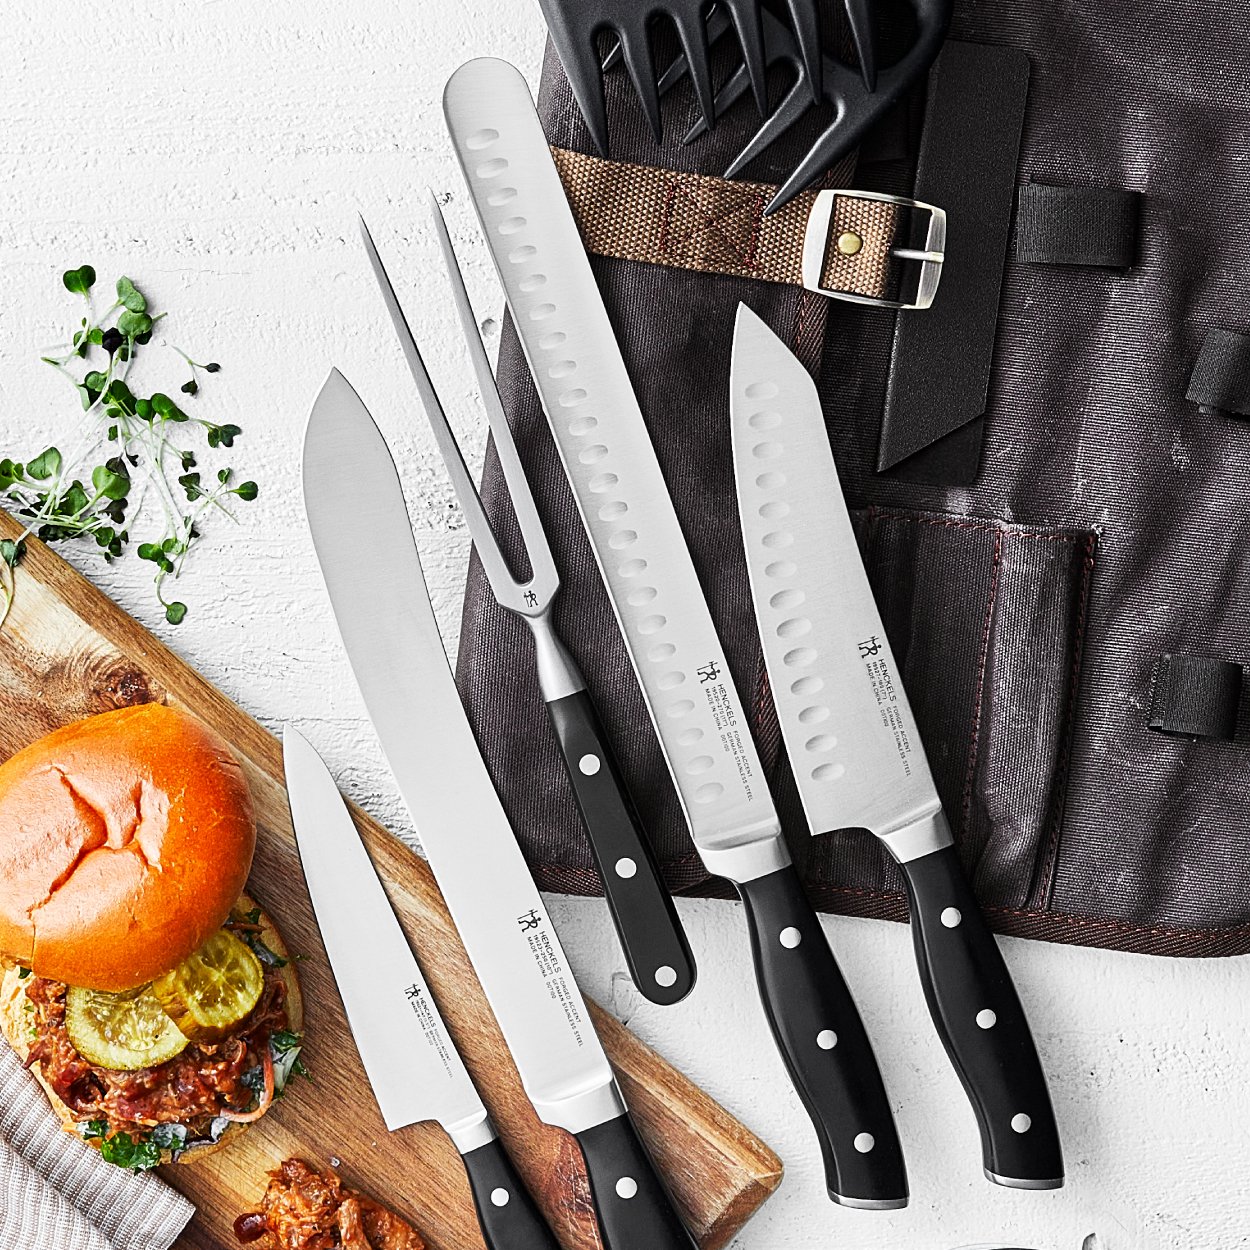 https://www.zwilling.com/on/demandware.static/-/Sites-zwilling-us-Library/default/dwe0a10da9/images/product-content/masonry-content/henckels/cutlery/BBQTools_Mason_Comp_Masonry_600x600_Set.jpg